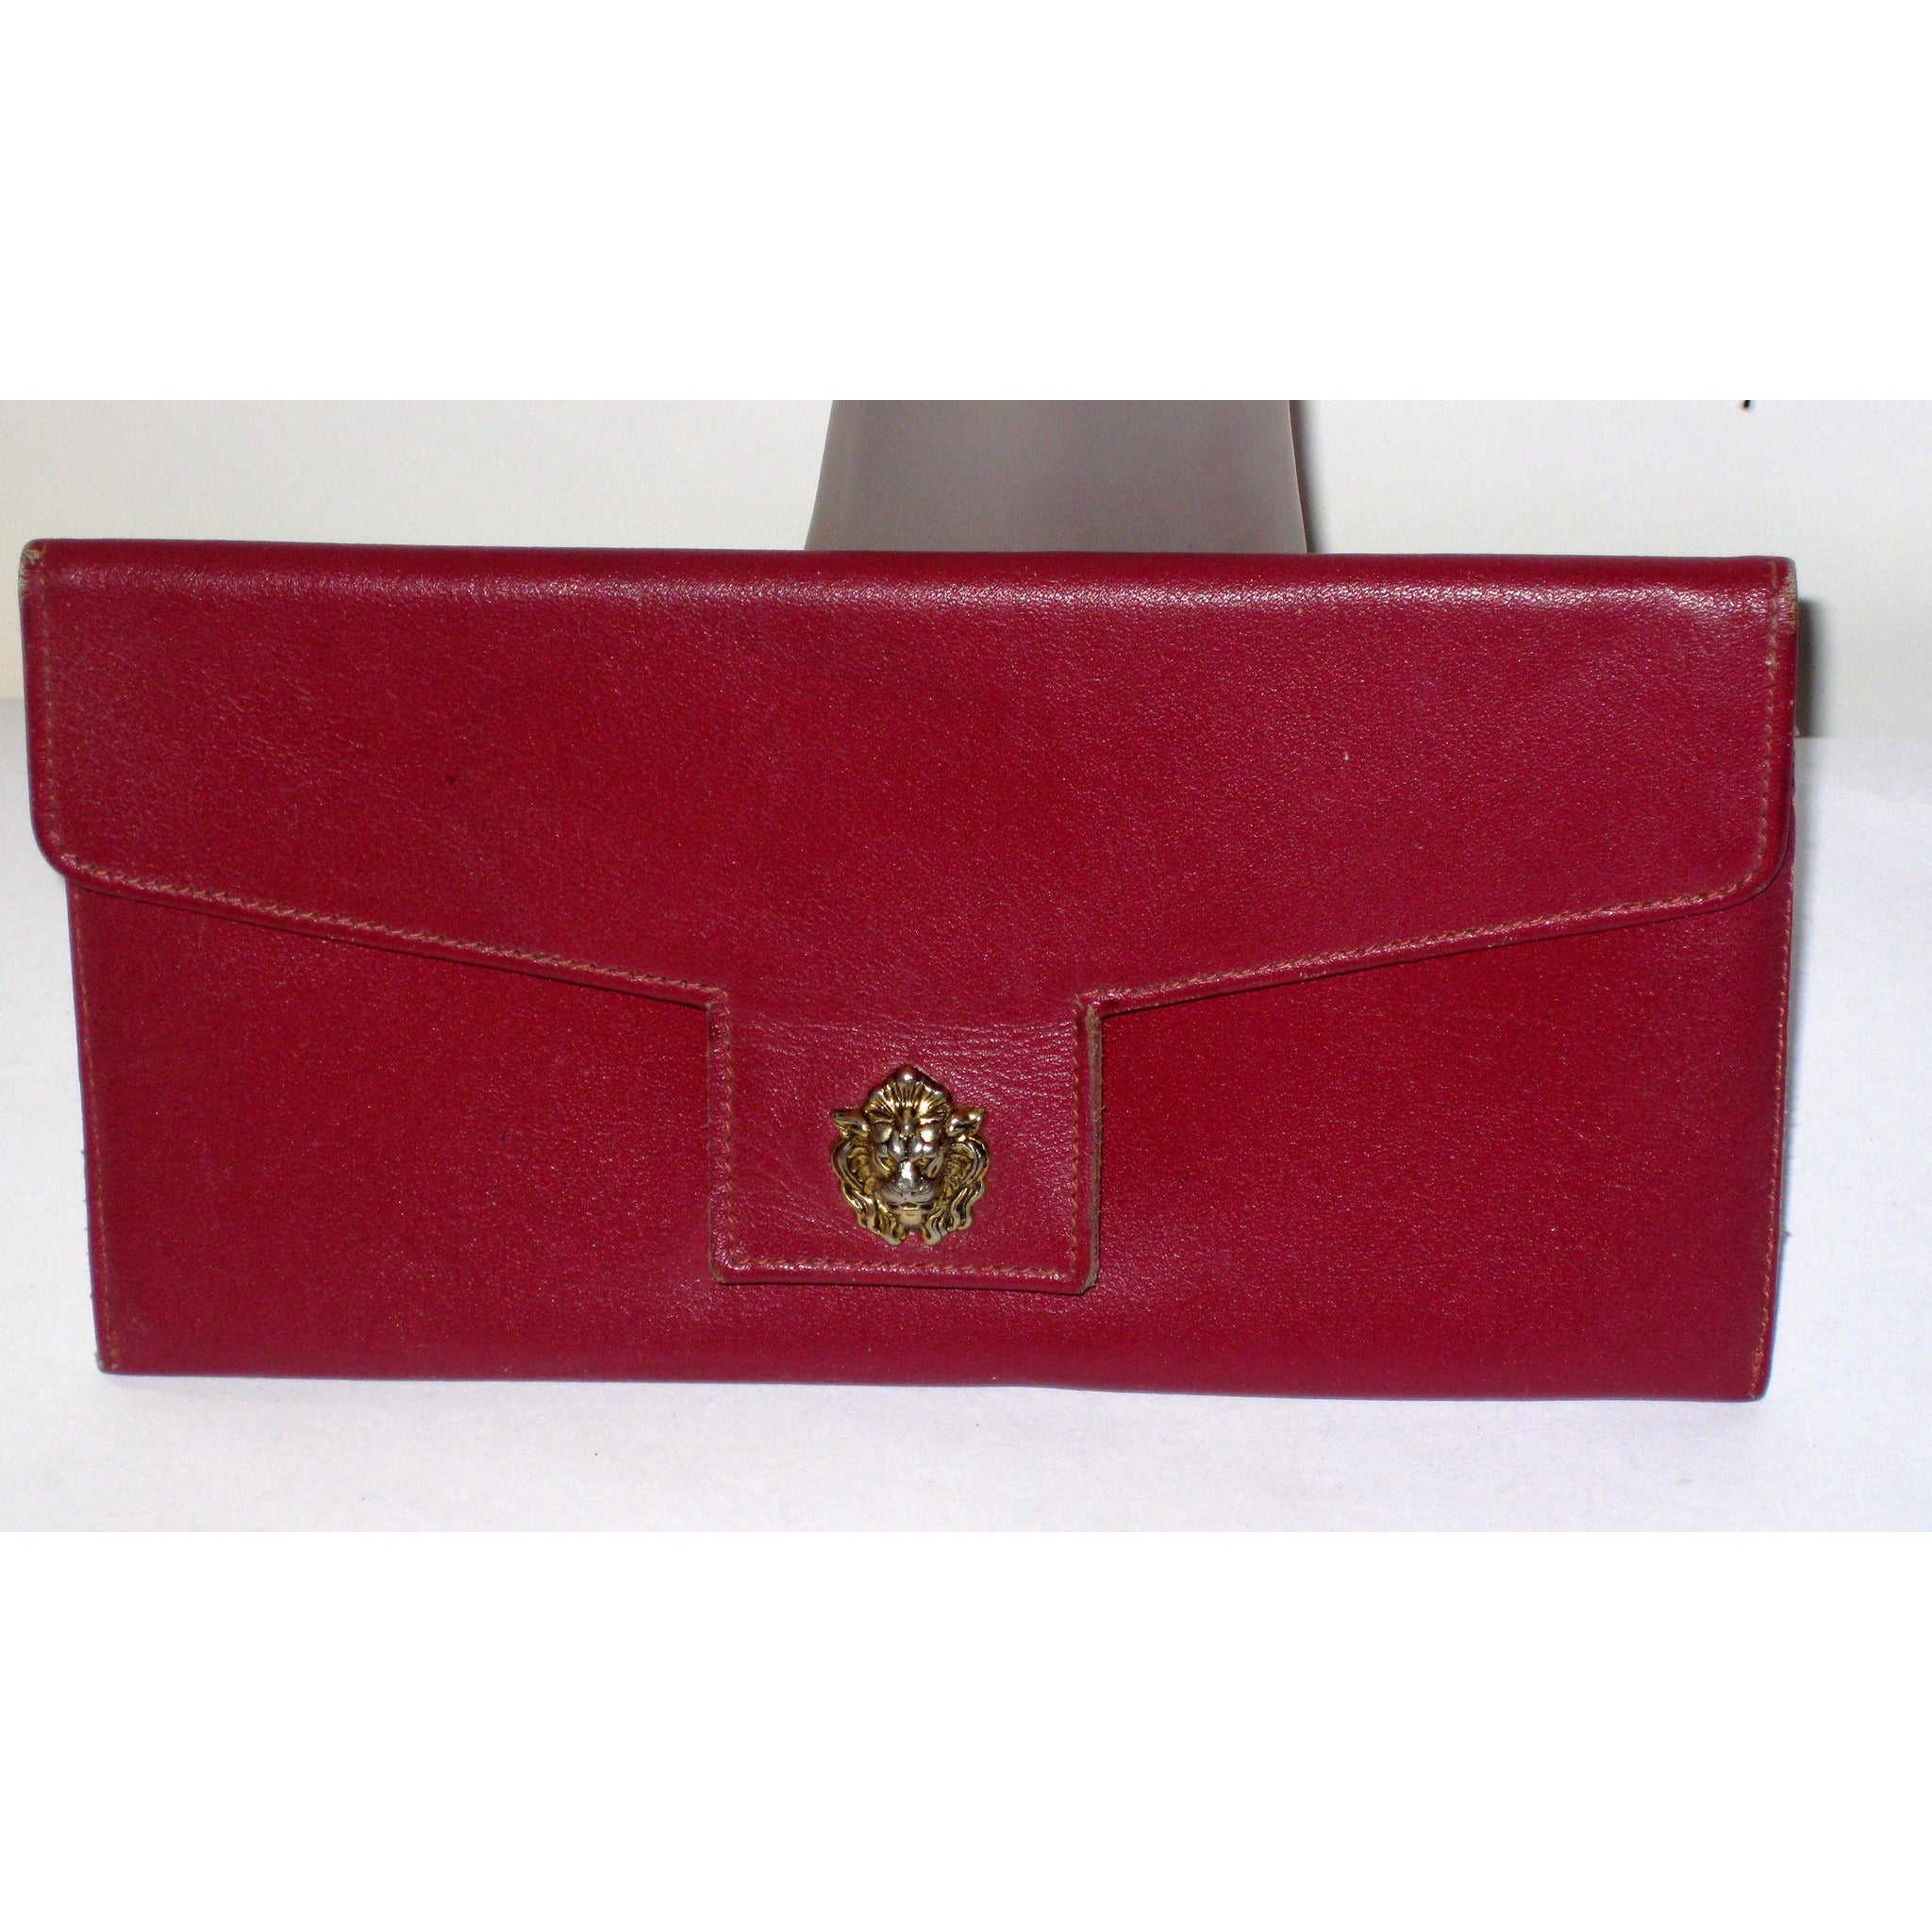 Vintage Red Leather Wallet By Bond Street Original | Quirky Finds